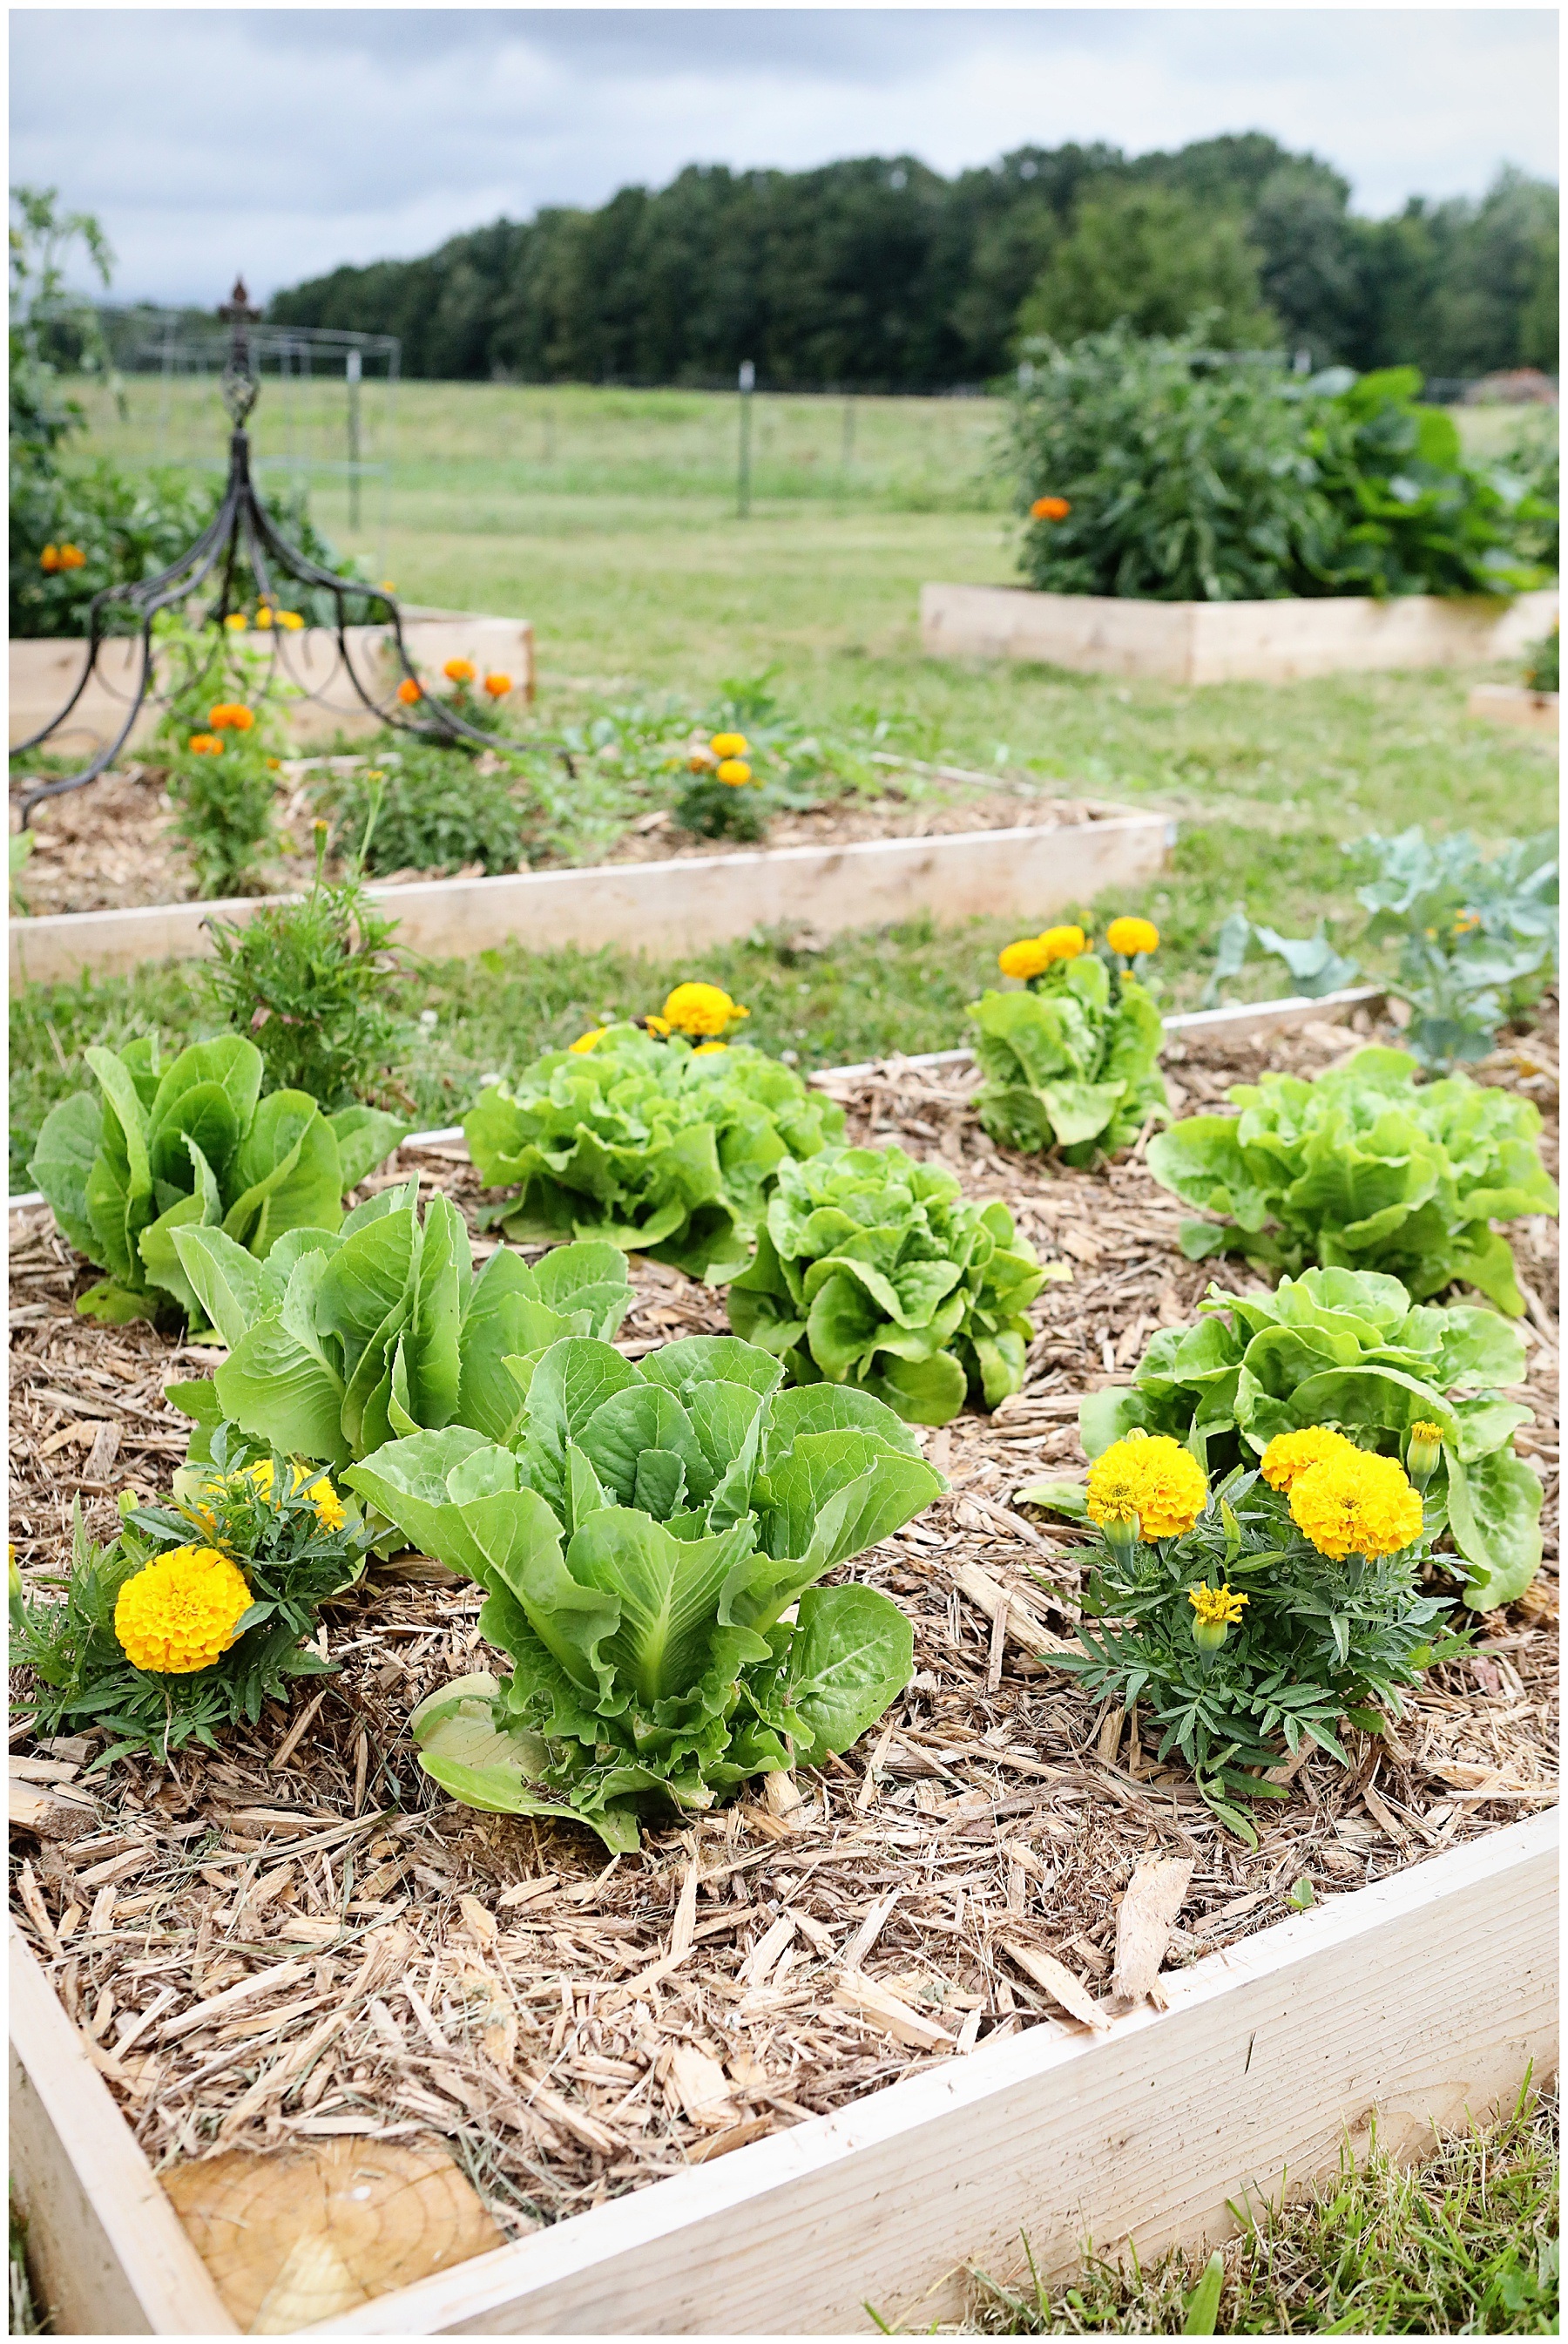 How to kill grass and weeds naturally in garden beds